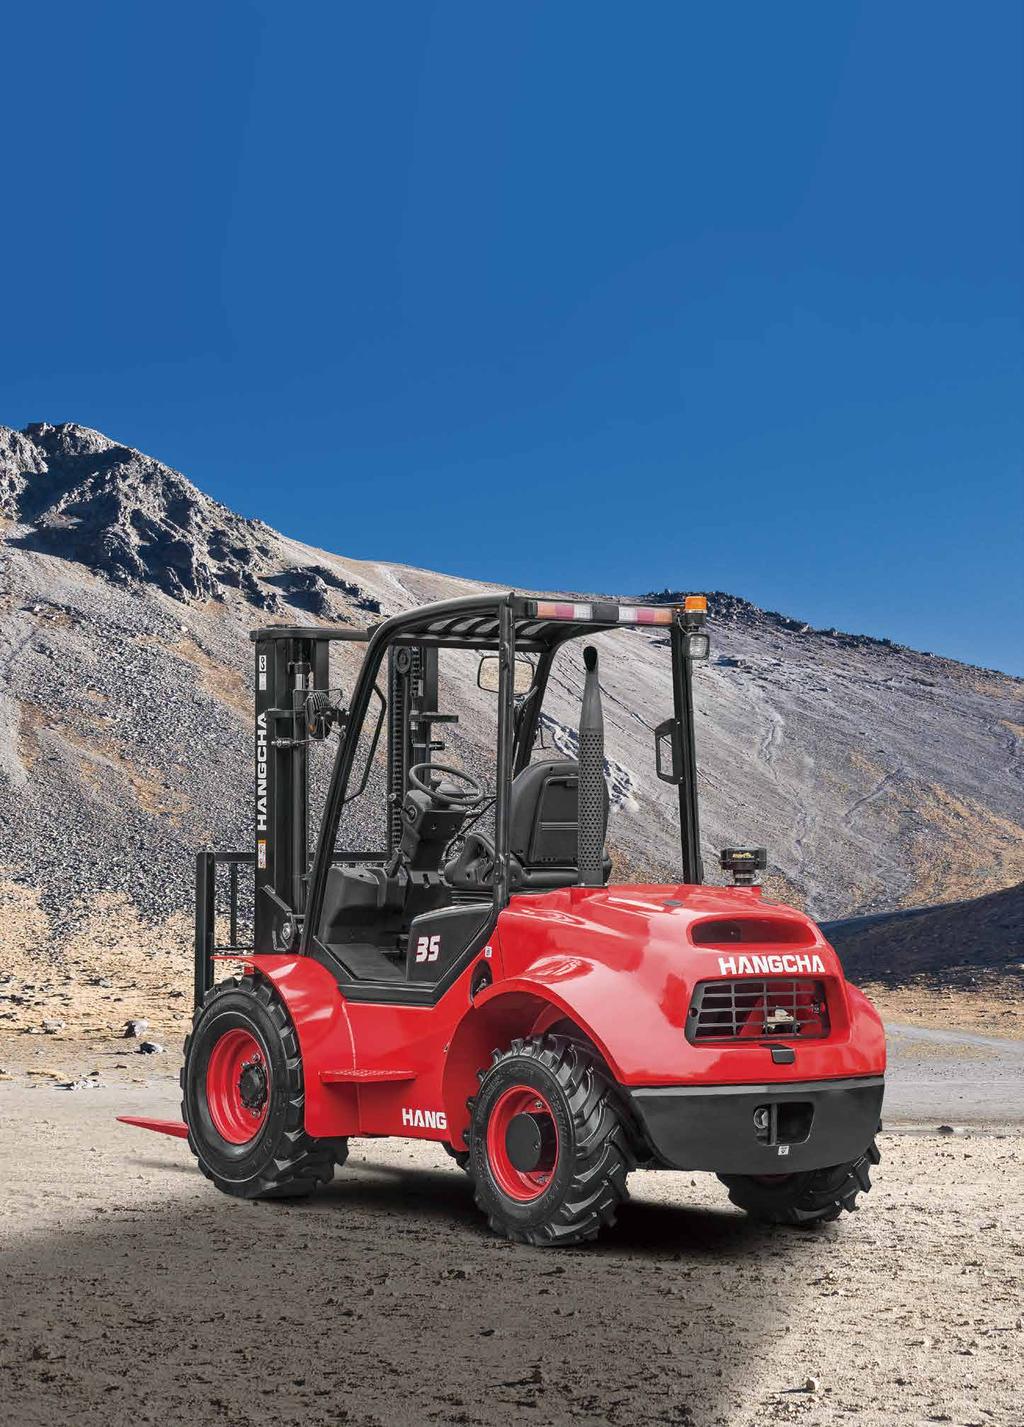 FourWheel Drive Rough Terrain Forklift with capacities of 5,000 to 7,000lbs Q 7000... 6000......... ""..._ 5000... r,... 4000 A M E R C A r r r r r,... r 3000 2000 inch 19.7 27.6 35.4 43.3 51.